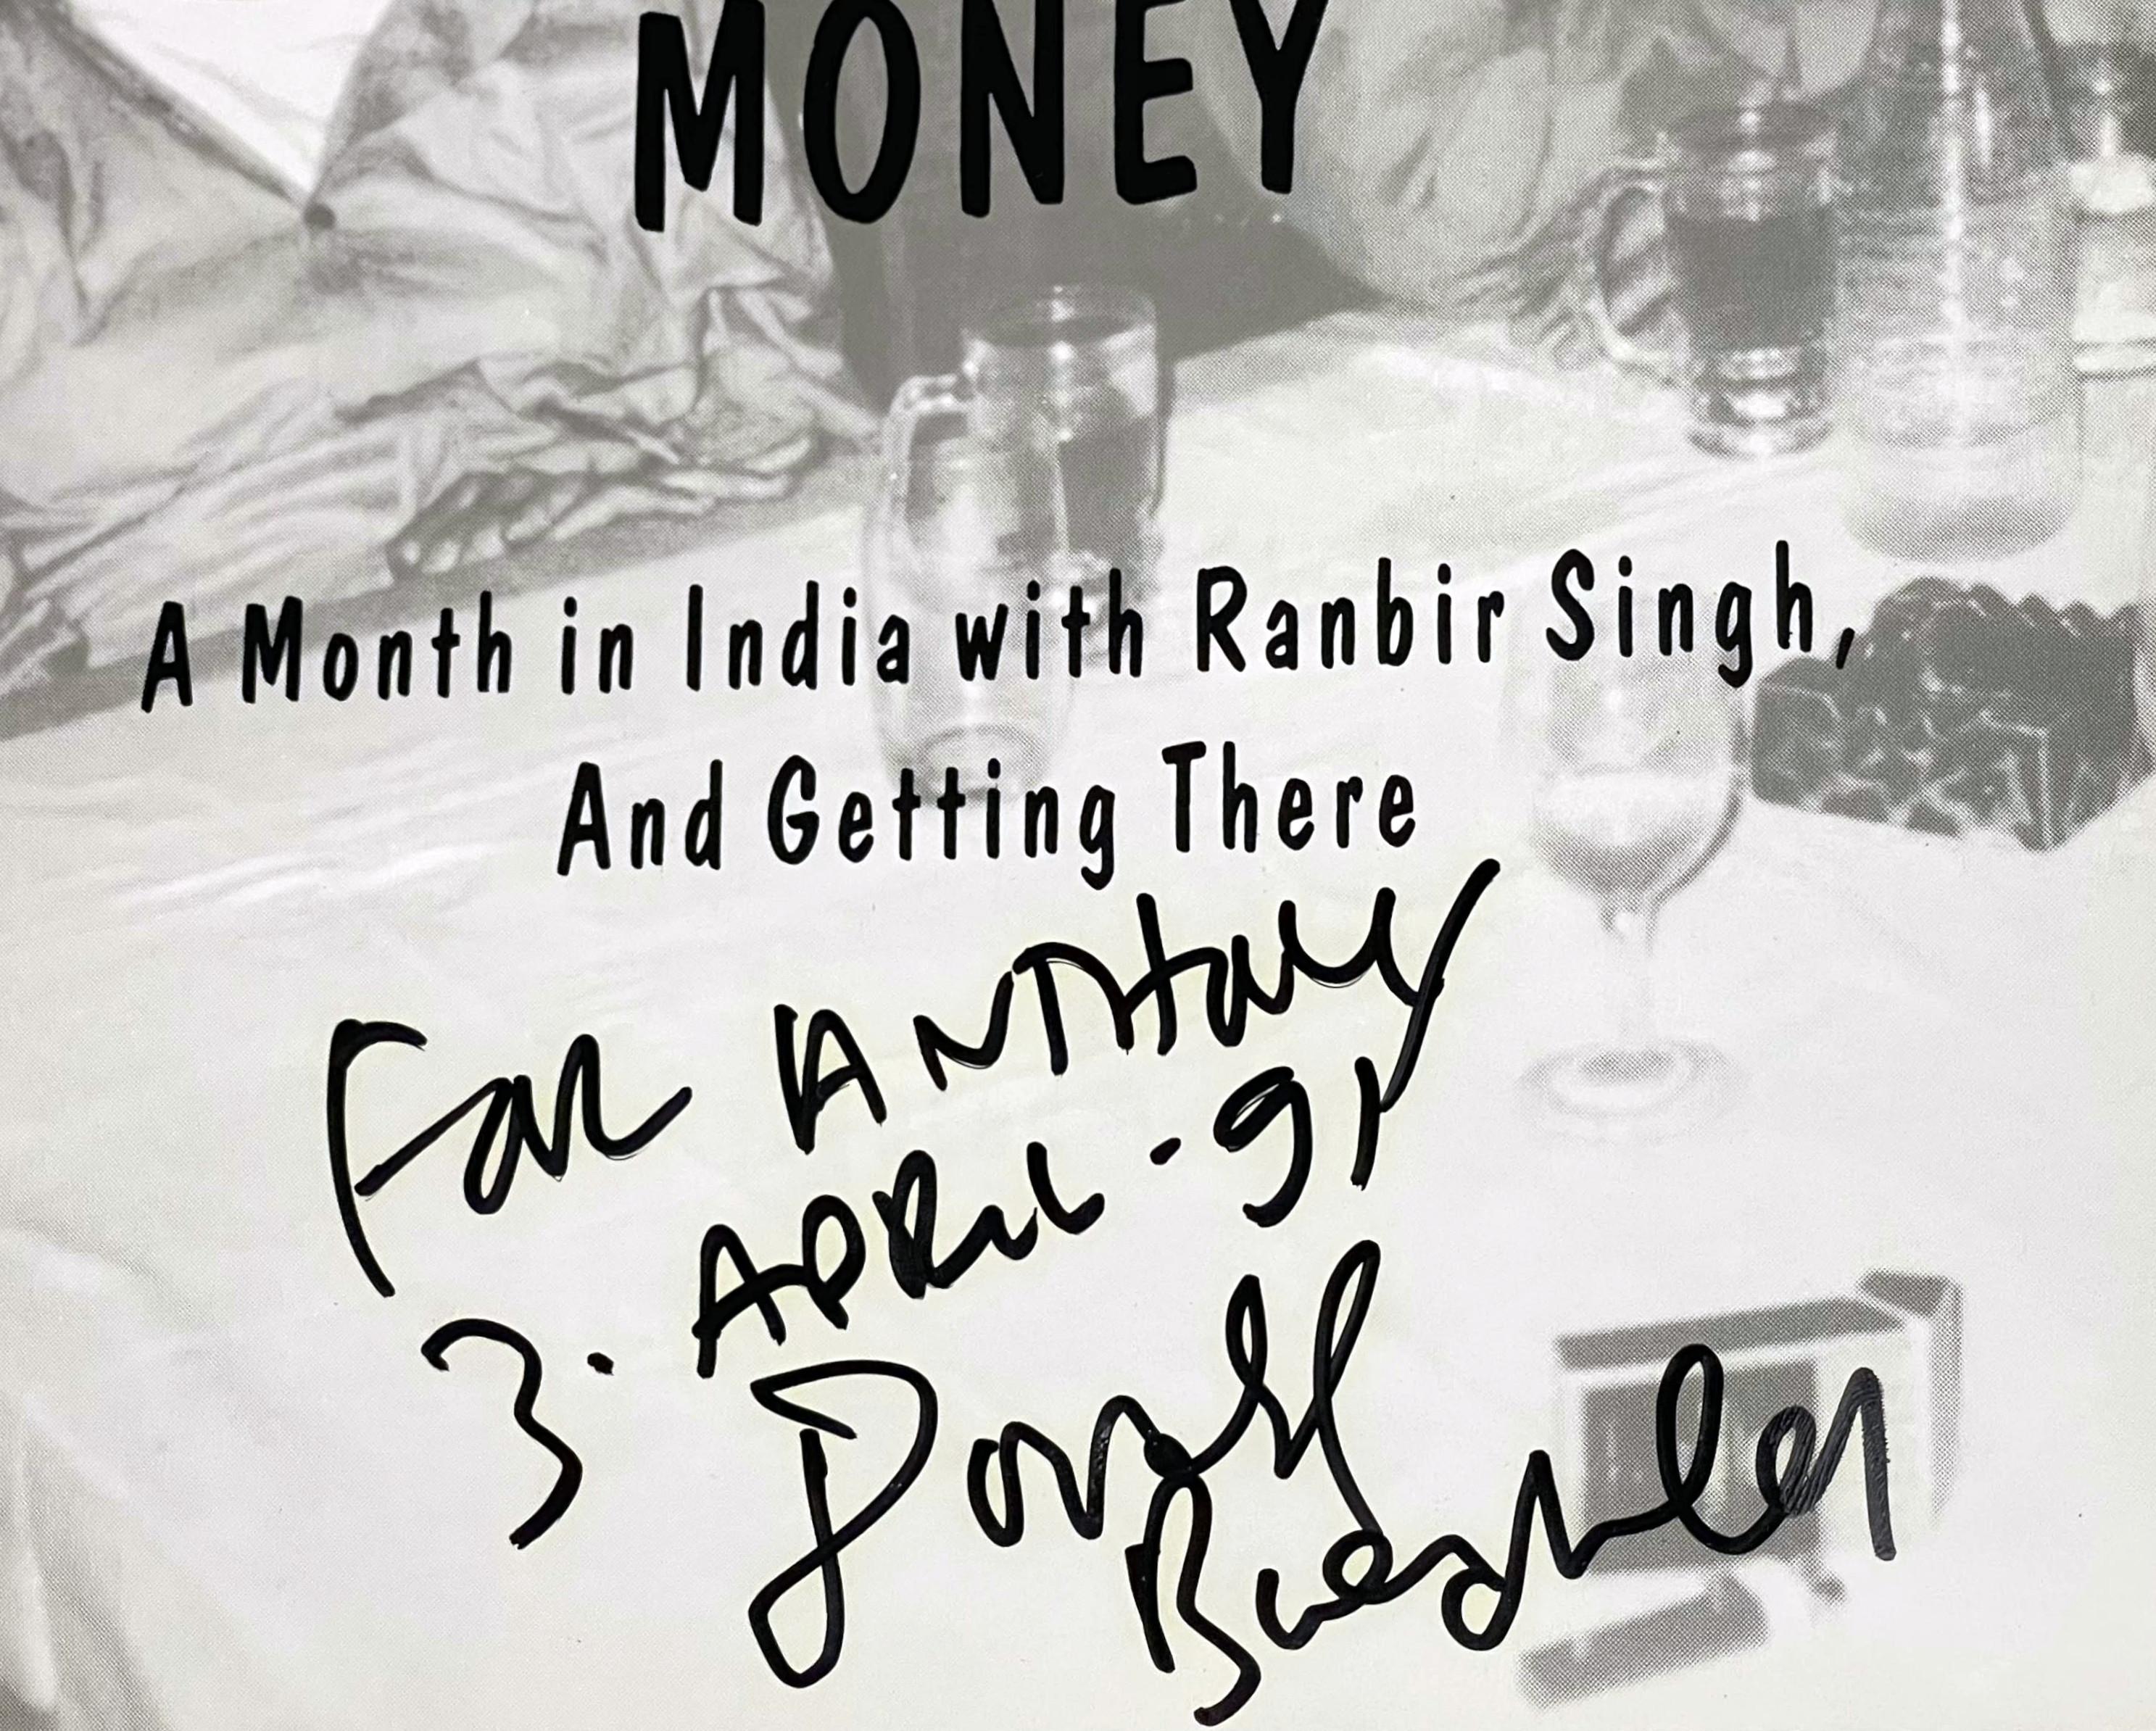 Donald Baechler
Wasted Time and Money: A Month in India with Ranbir Singh, and Getting There (Hand signed and inscribed to art critic Anthony Haden-Guest), 1989
Softcover catalogue with stapled wraps (Hand signed by Donald Baechler and inscribed to